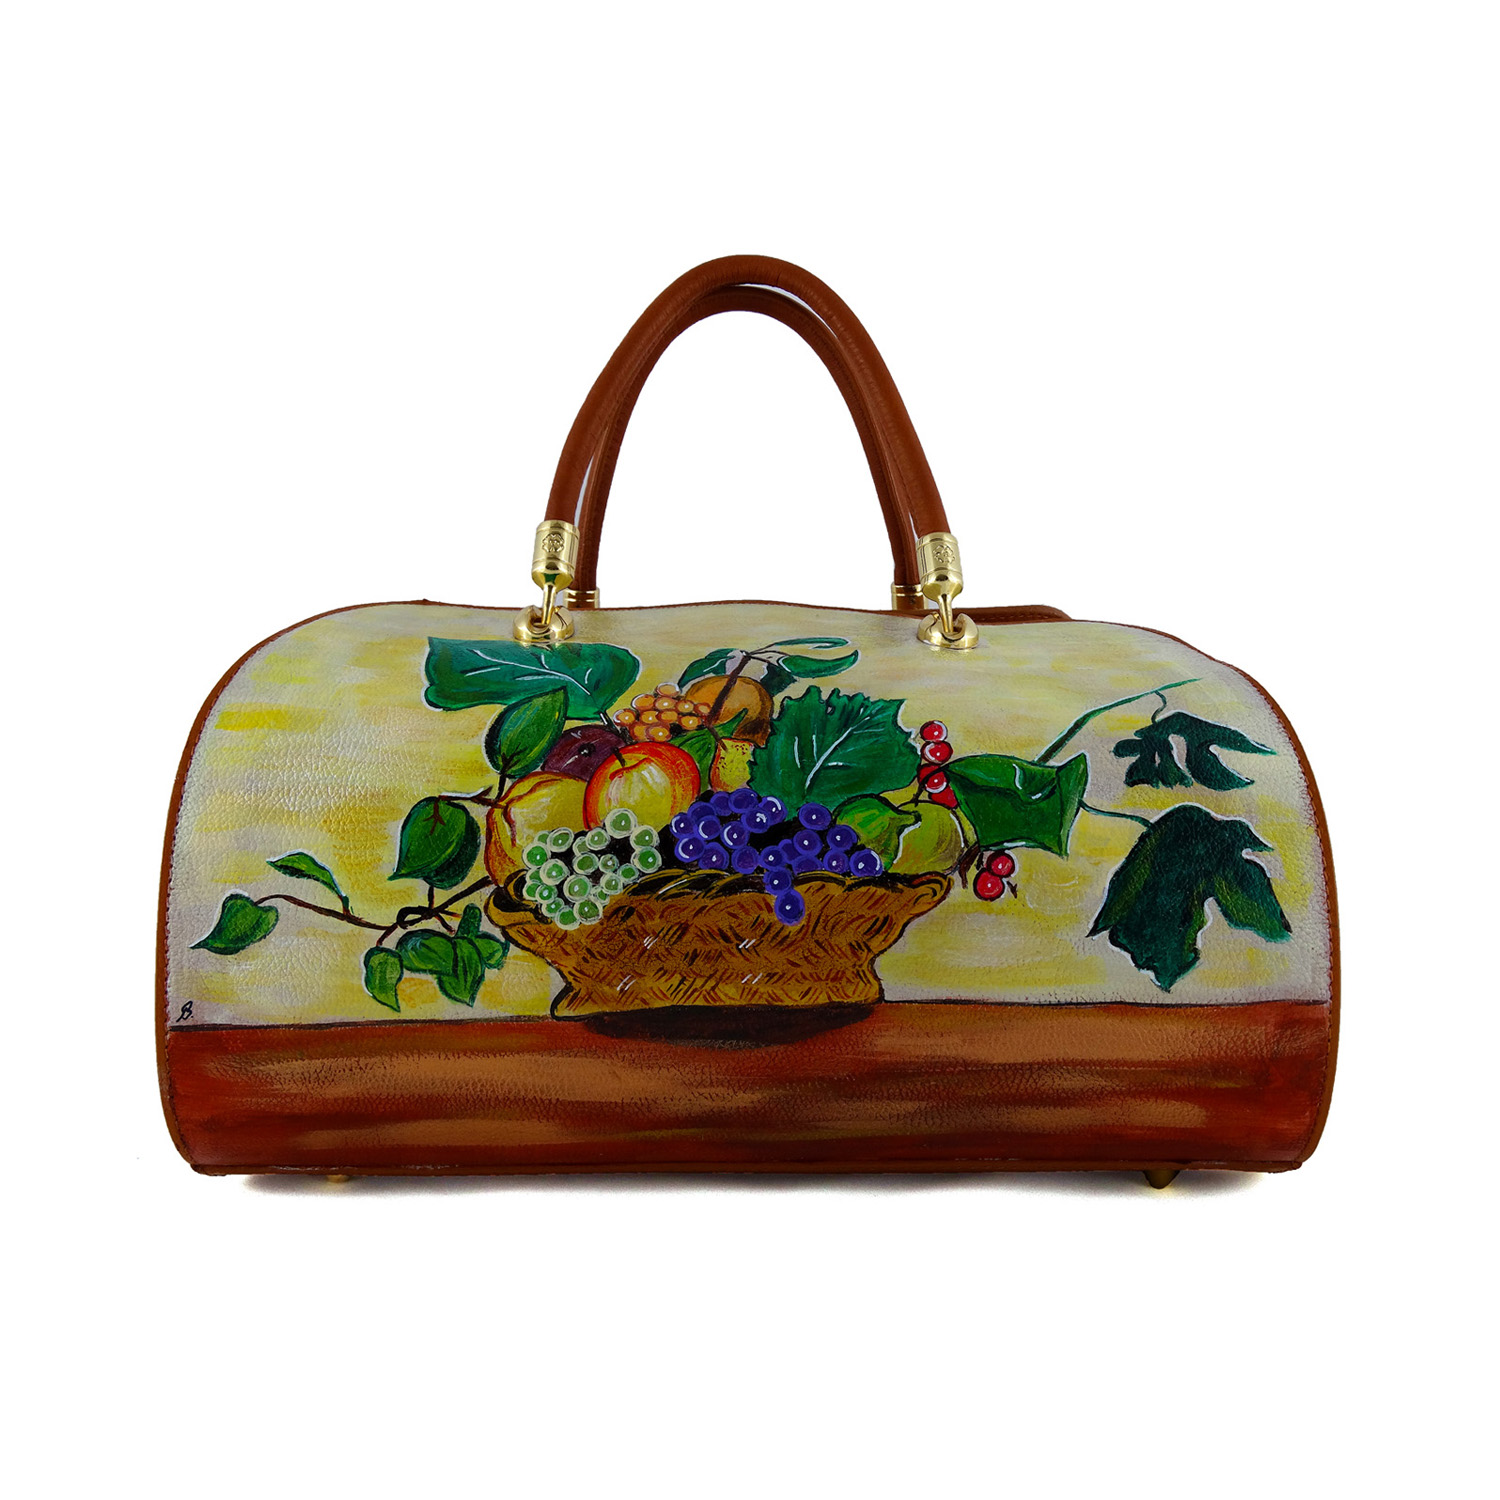 Hand painted bag - Basket of Fruit by Caravaggio